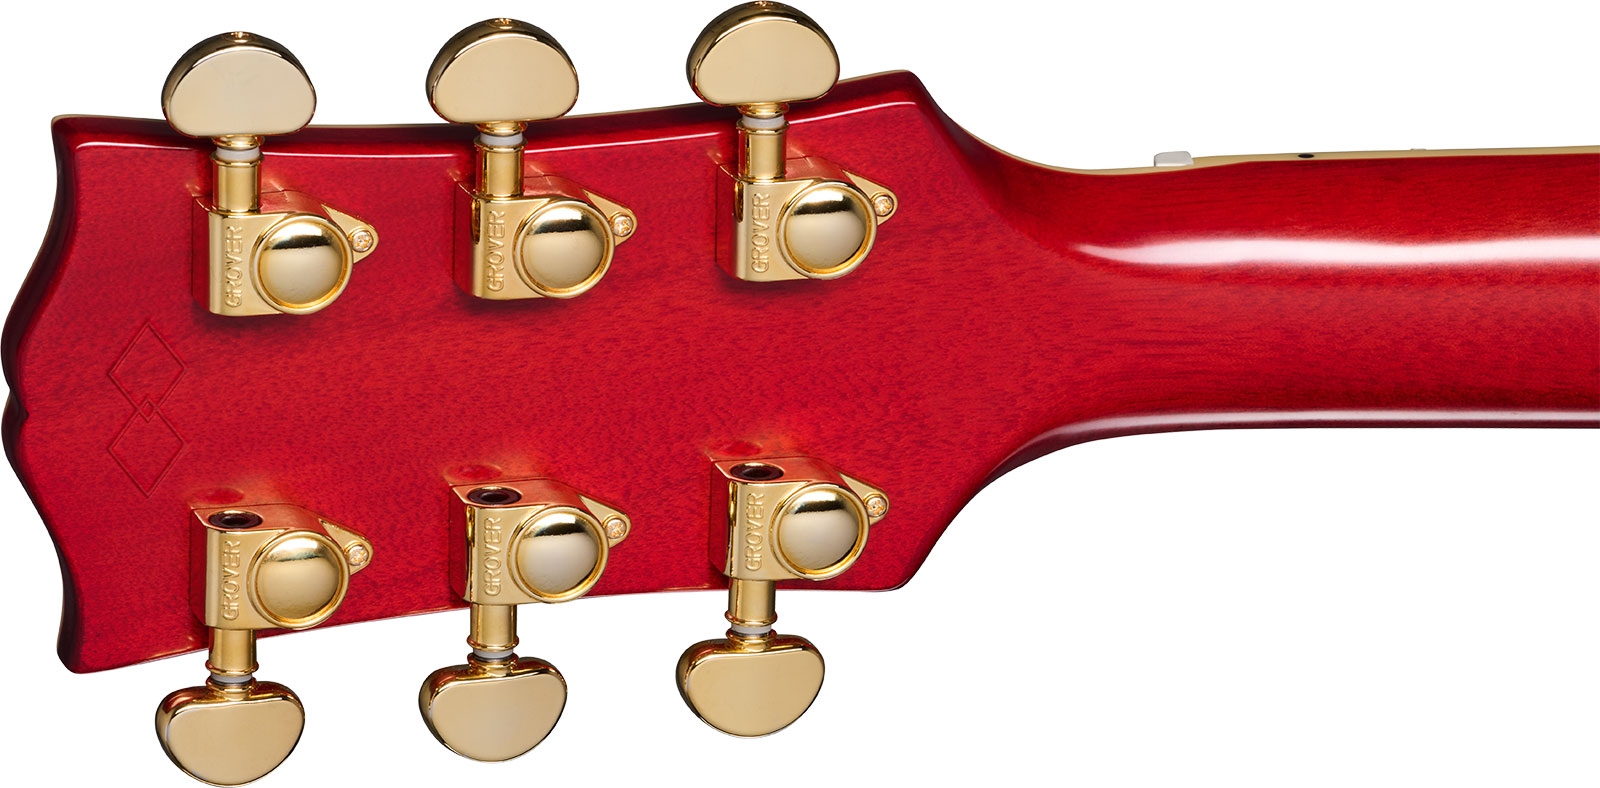 Epiphone Es355 1959 Inspired By 2h Gibson Ht Eb - Vos Cherry Red - Guitare Électrique 1/2 Caisse - Variation 4